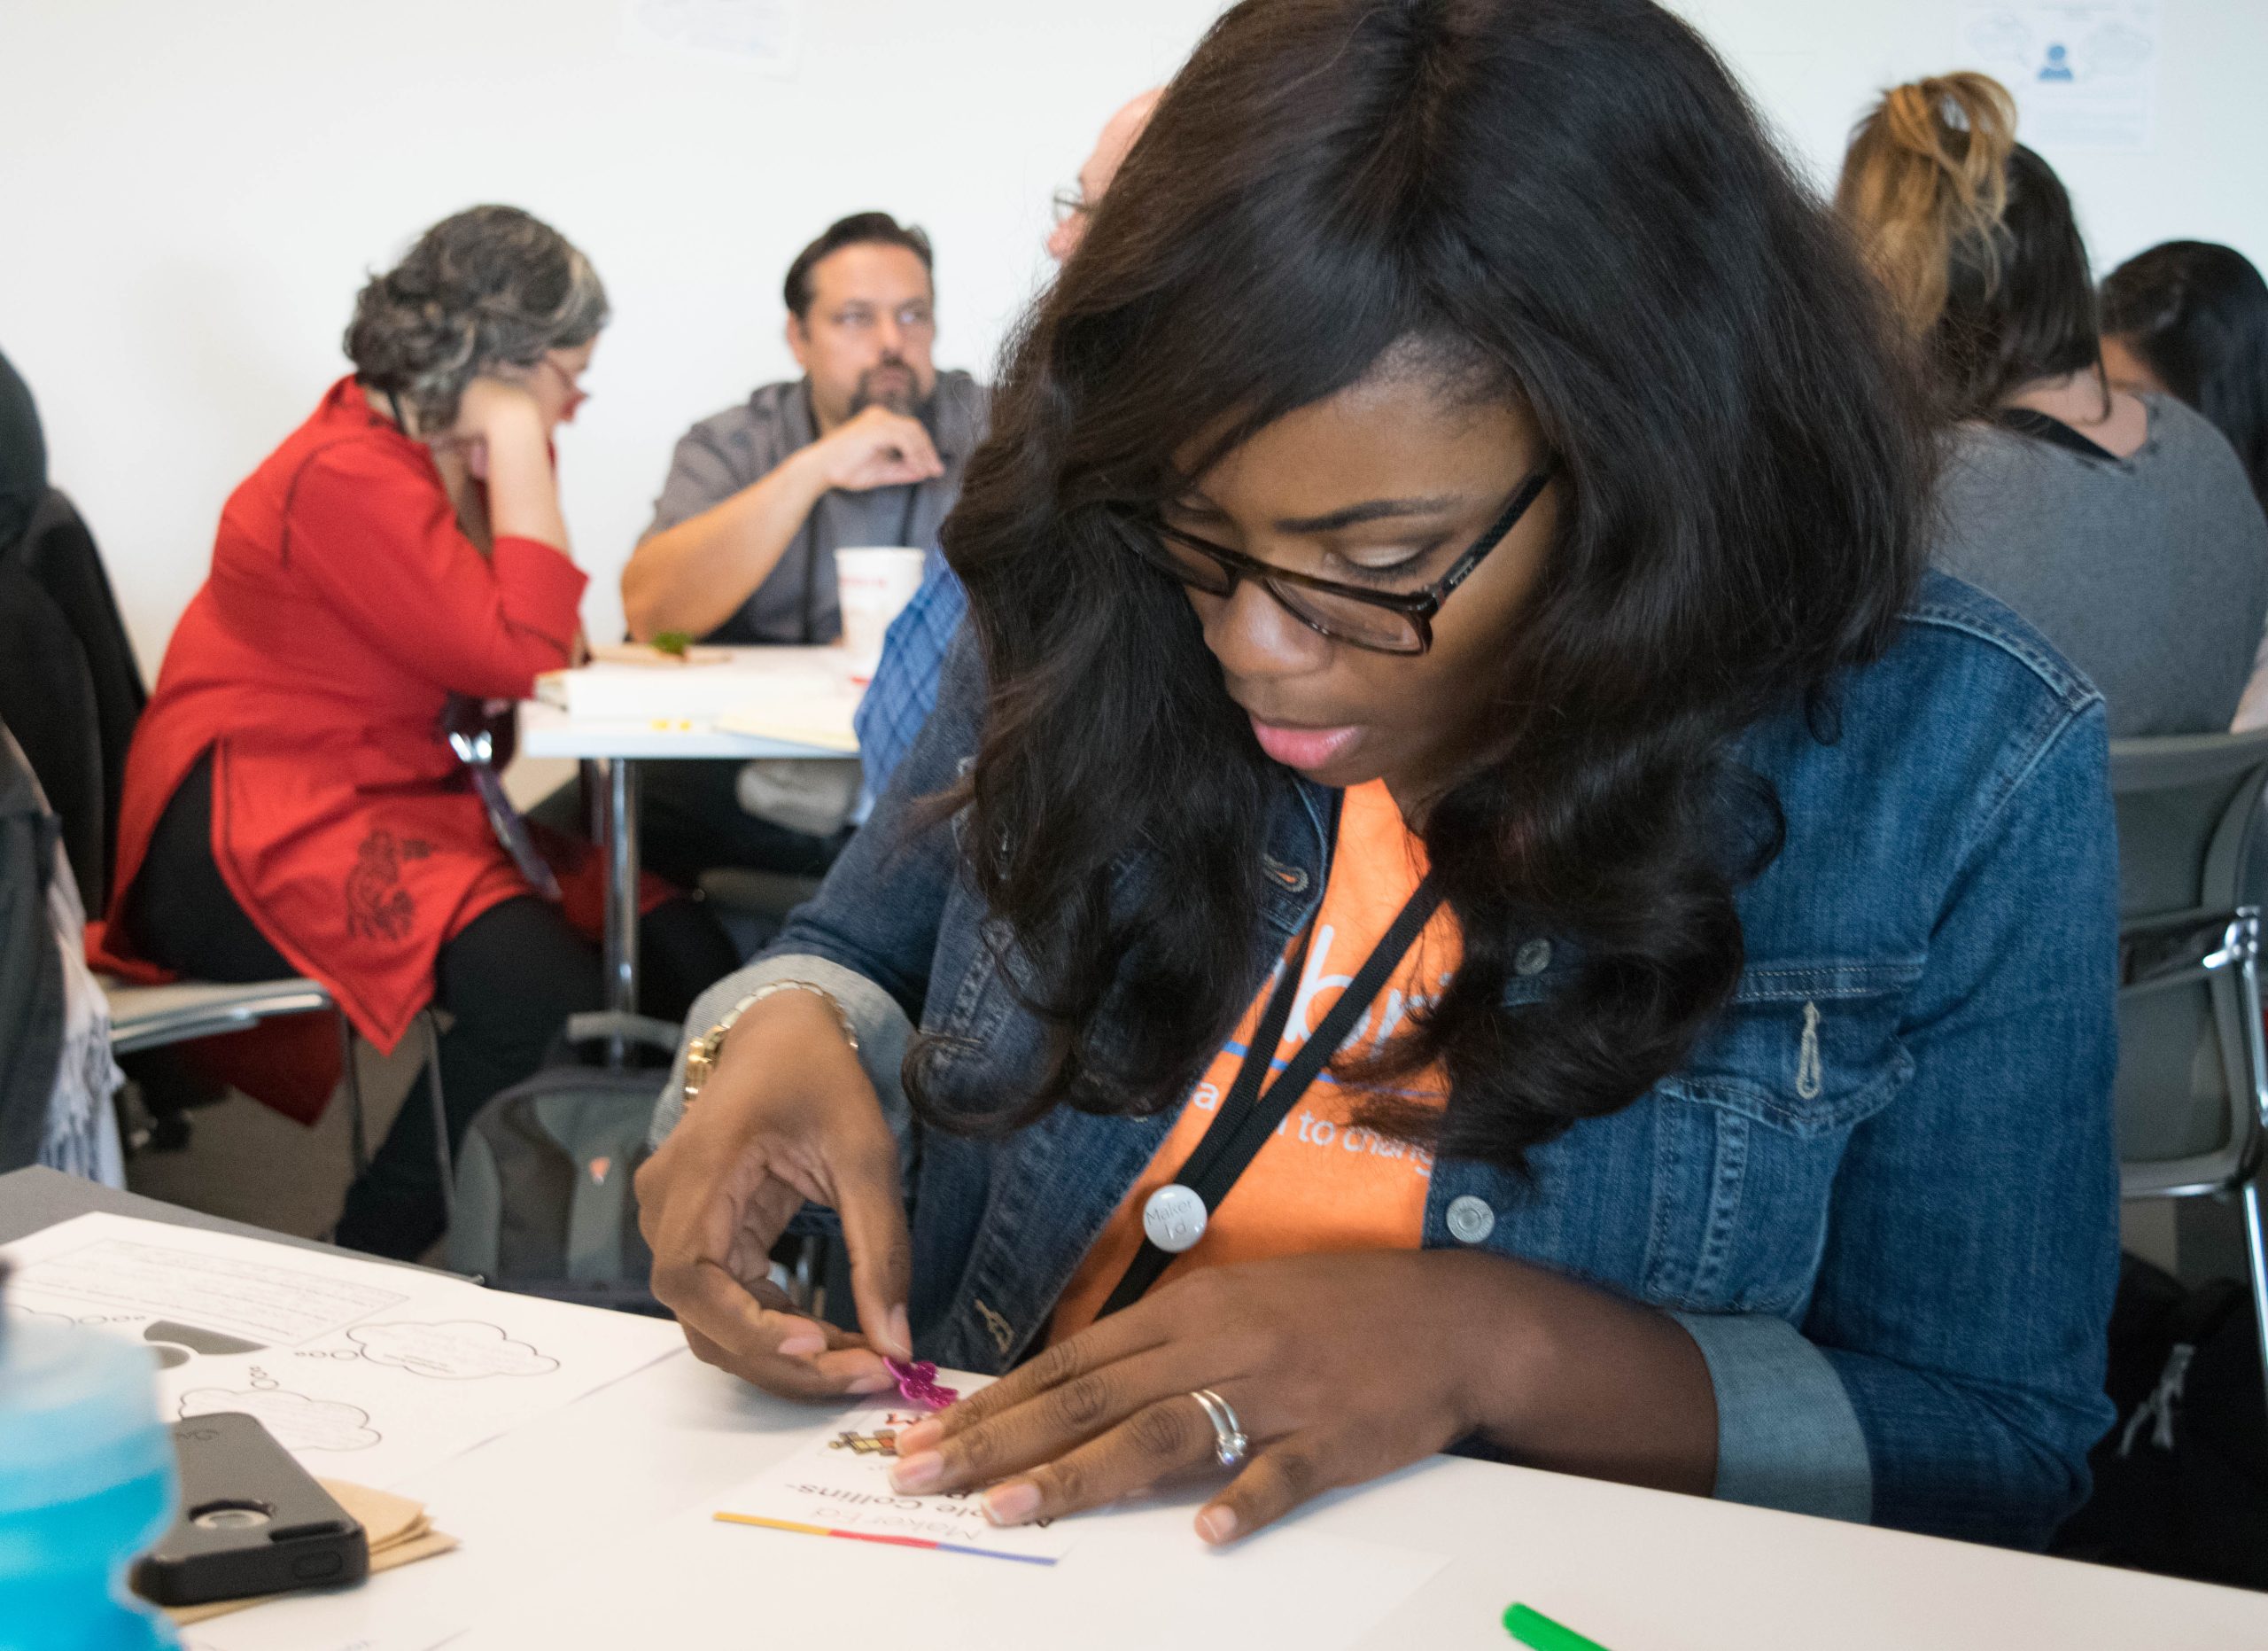 Six Ways to Build Girl-Inclusive Makerspaces